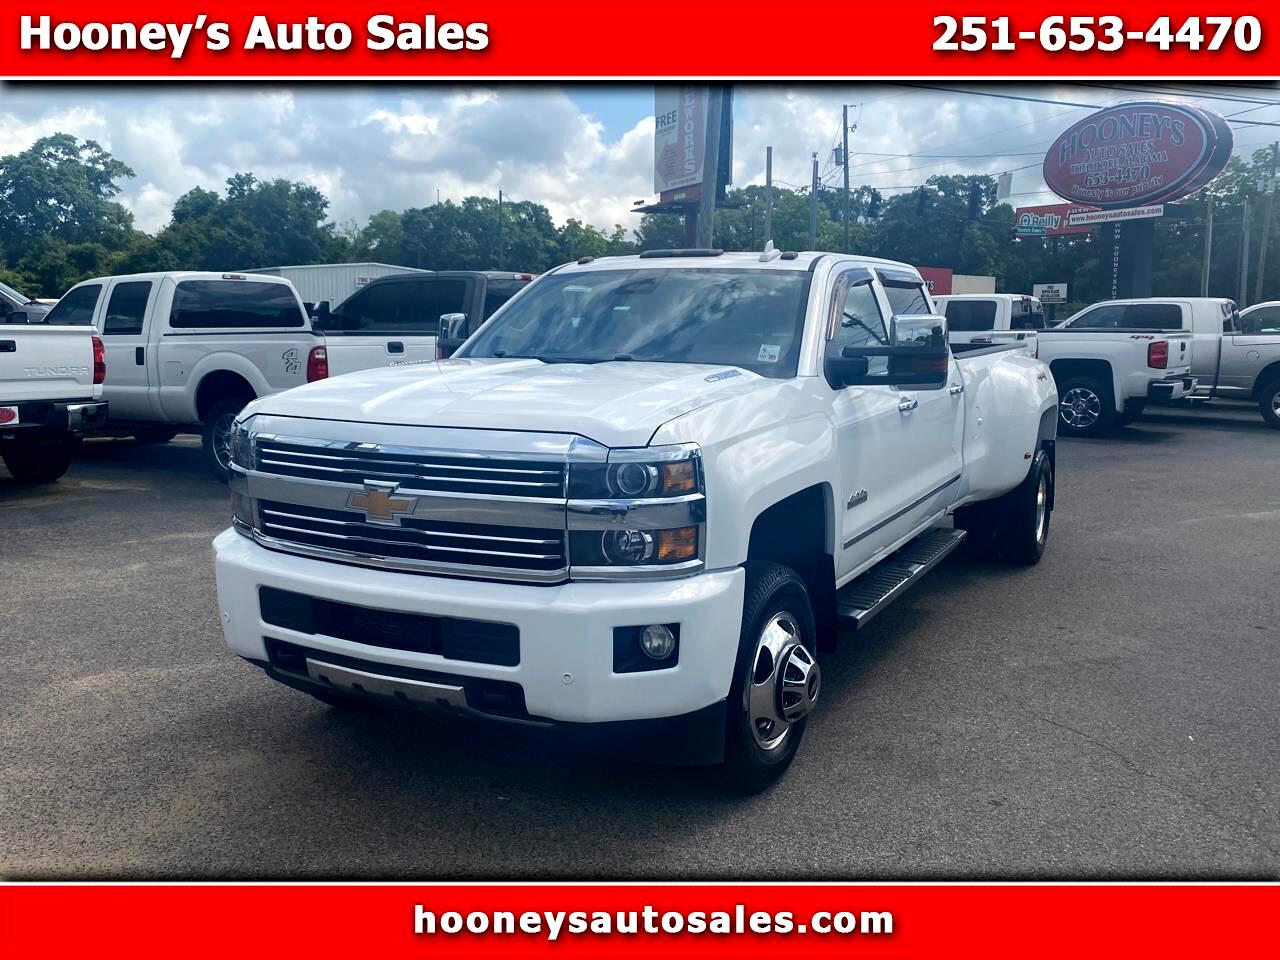 2015 Chevrolet Silverado 3500HD Built After Aug 14 4WD Crew Cab 167.7" High Country